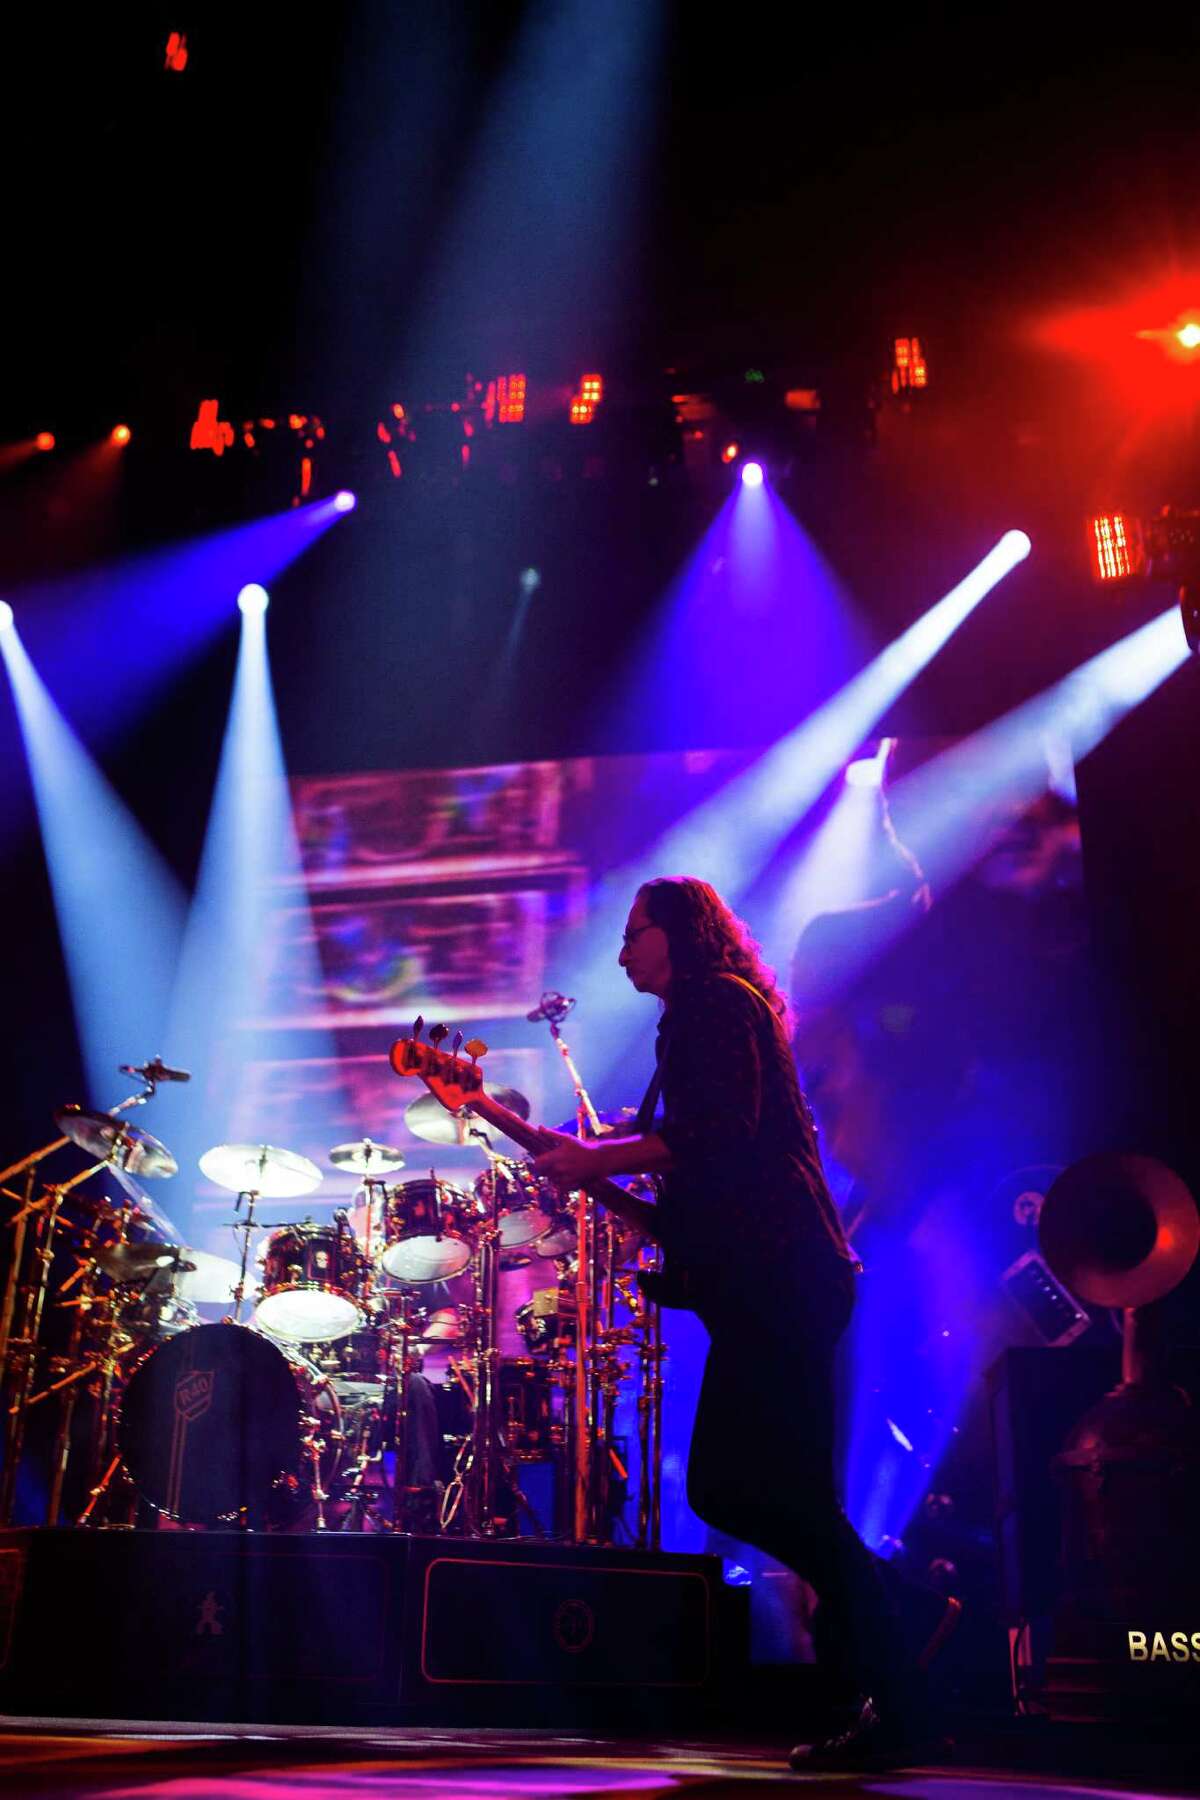 Rush's R40 Tour stopped at Toyota Center on May 20. The rock band celebrated 40 years as a trio.